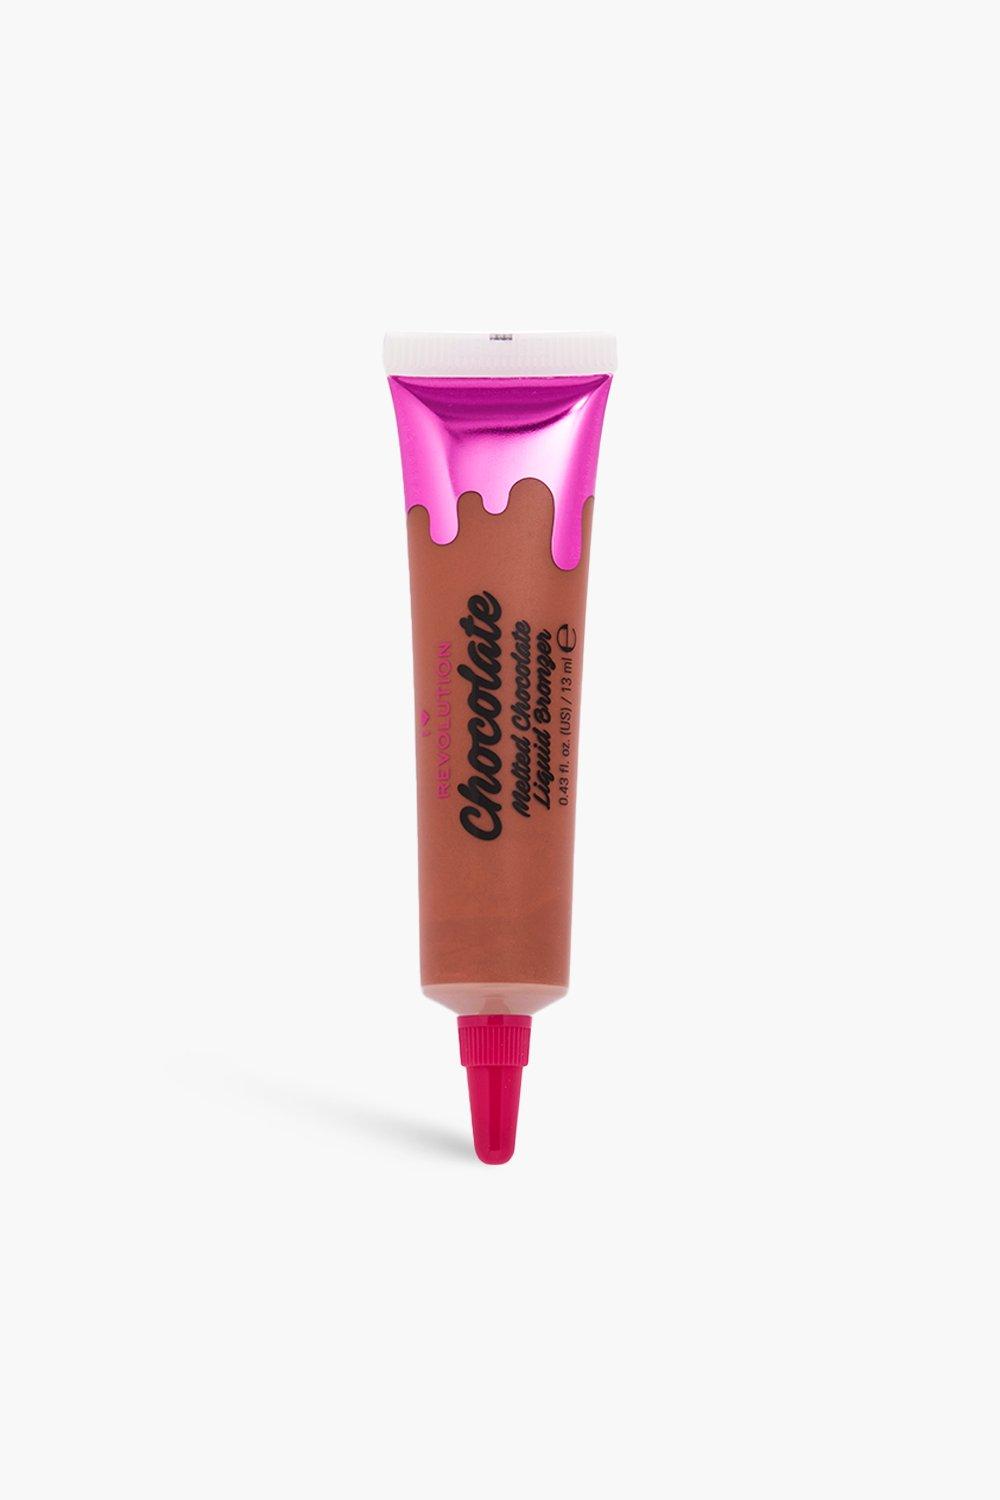 Boohoo I Heart Revolution Melted Chocolate Bronzer, 19 Toffee